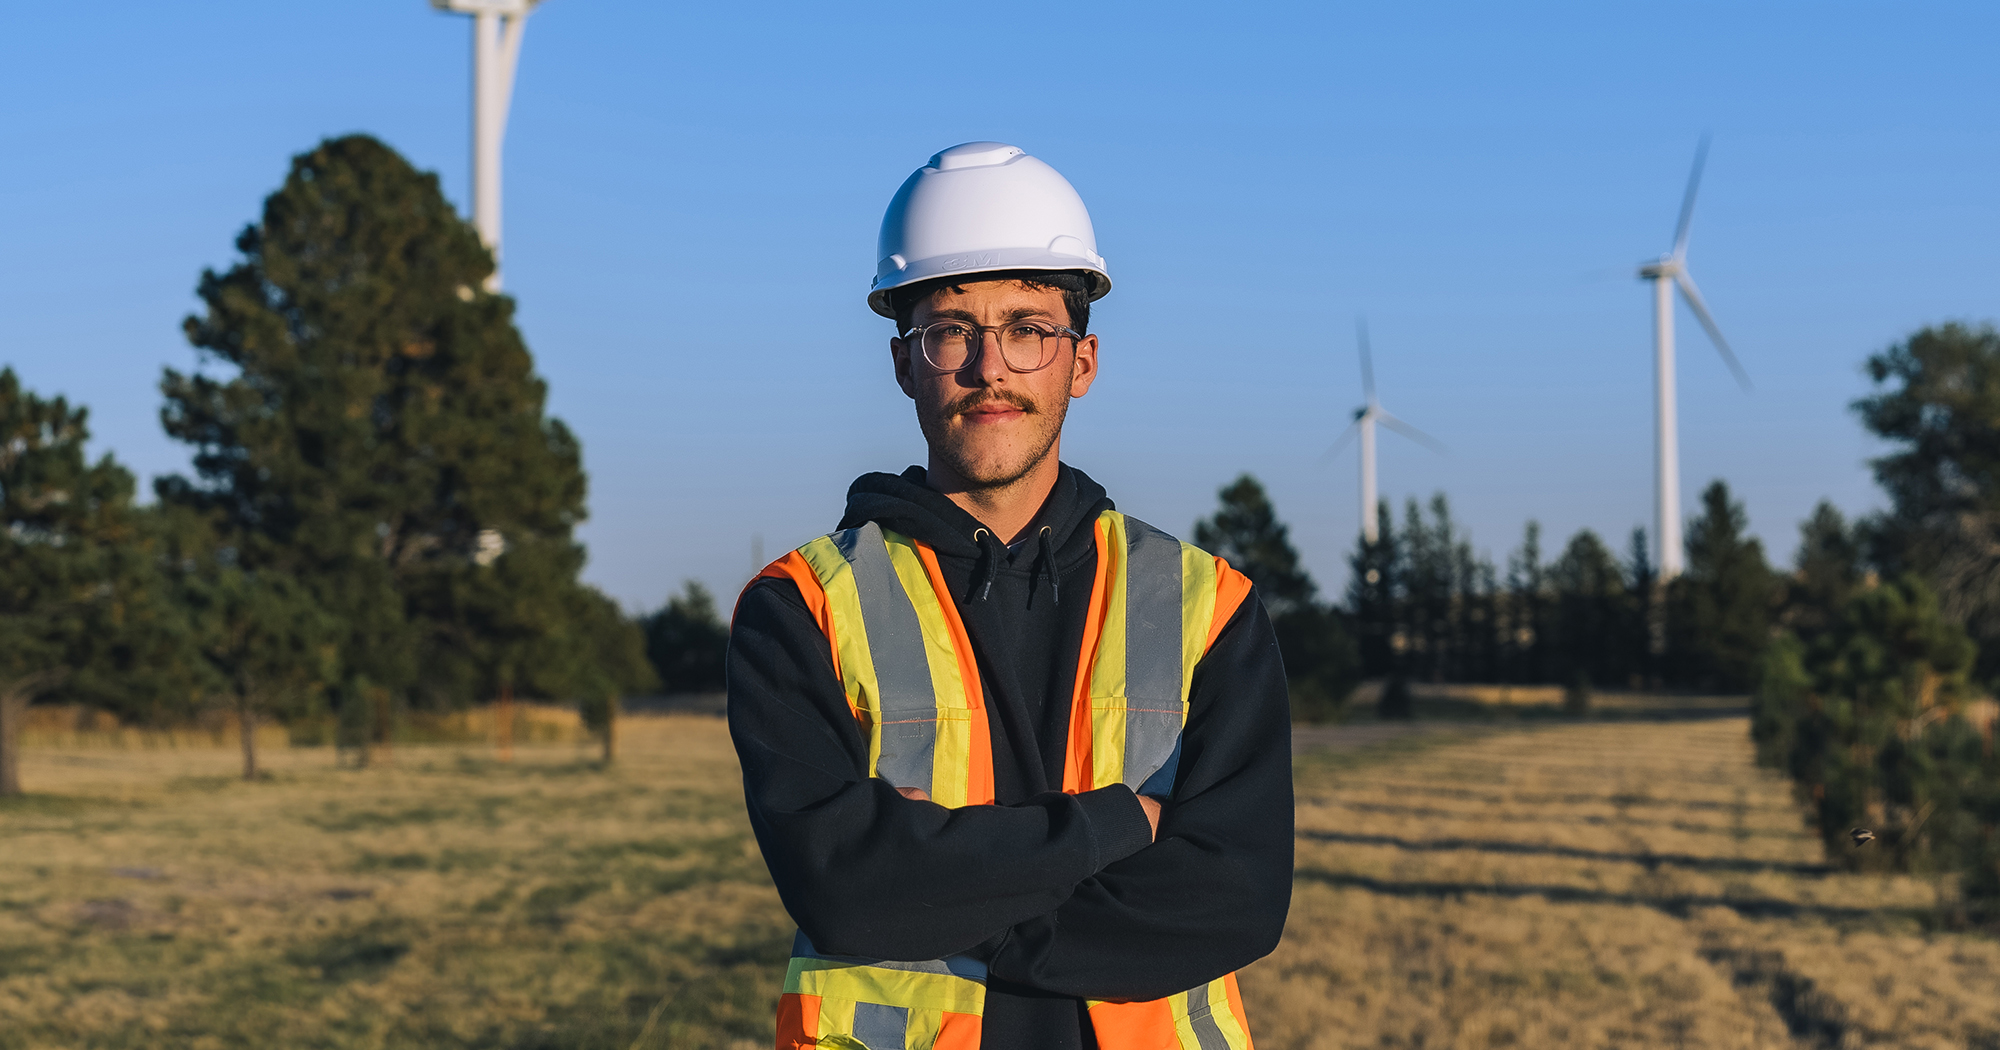 Male Wyoming apprentice in hard hat and safety vest